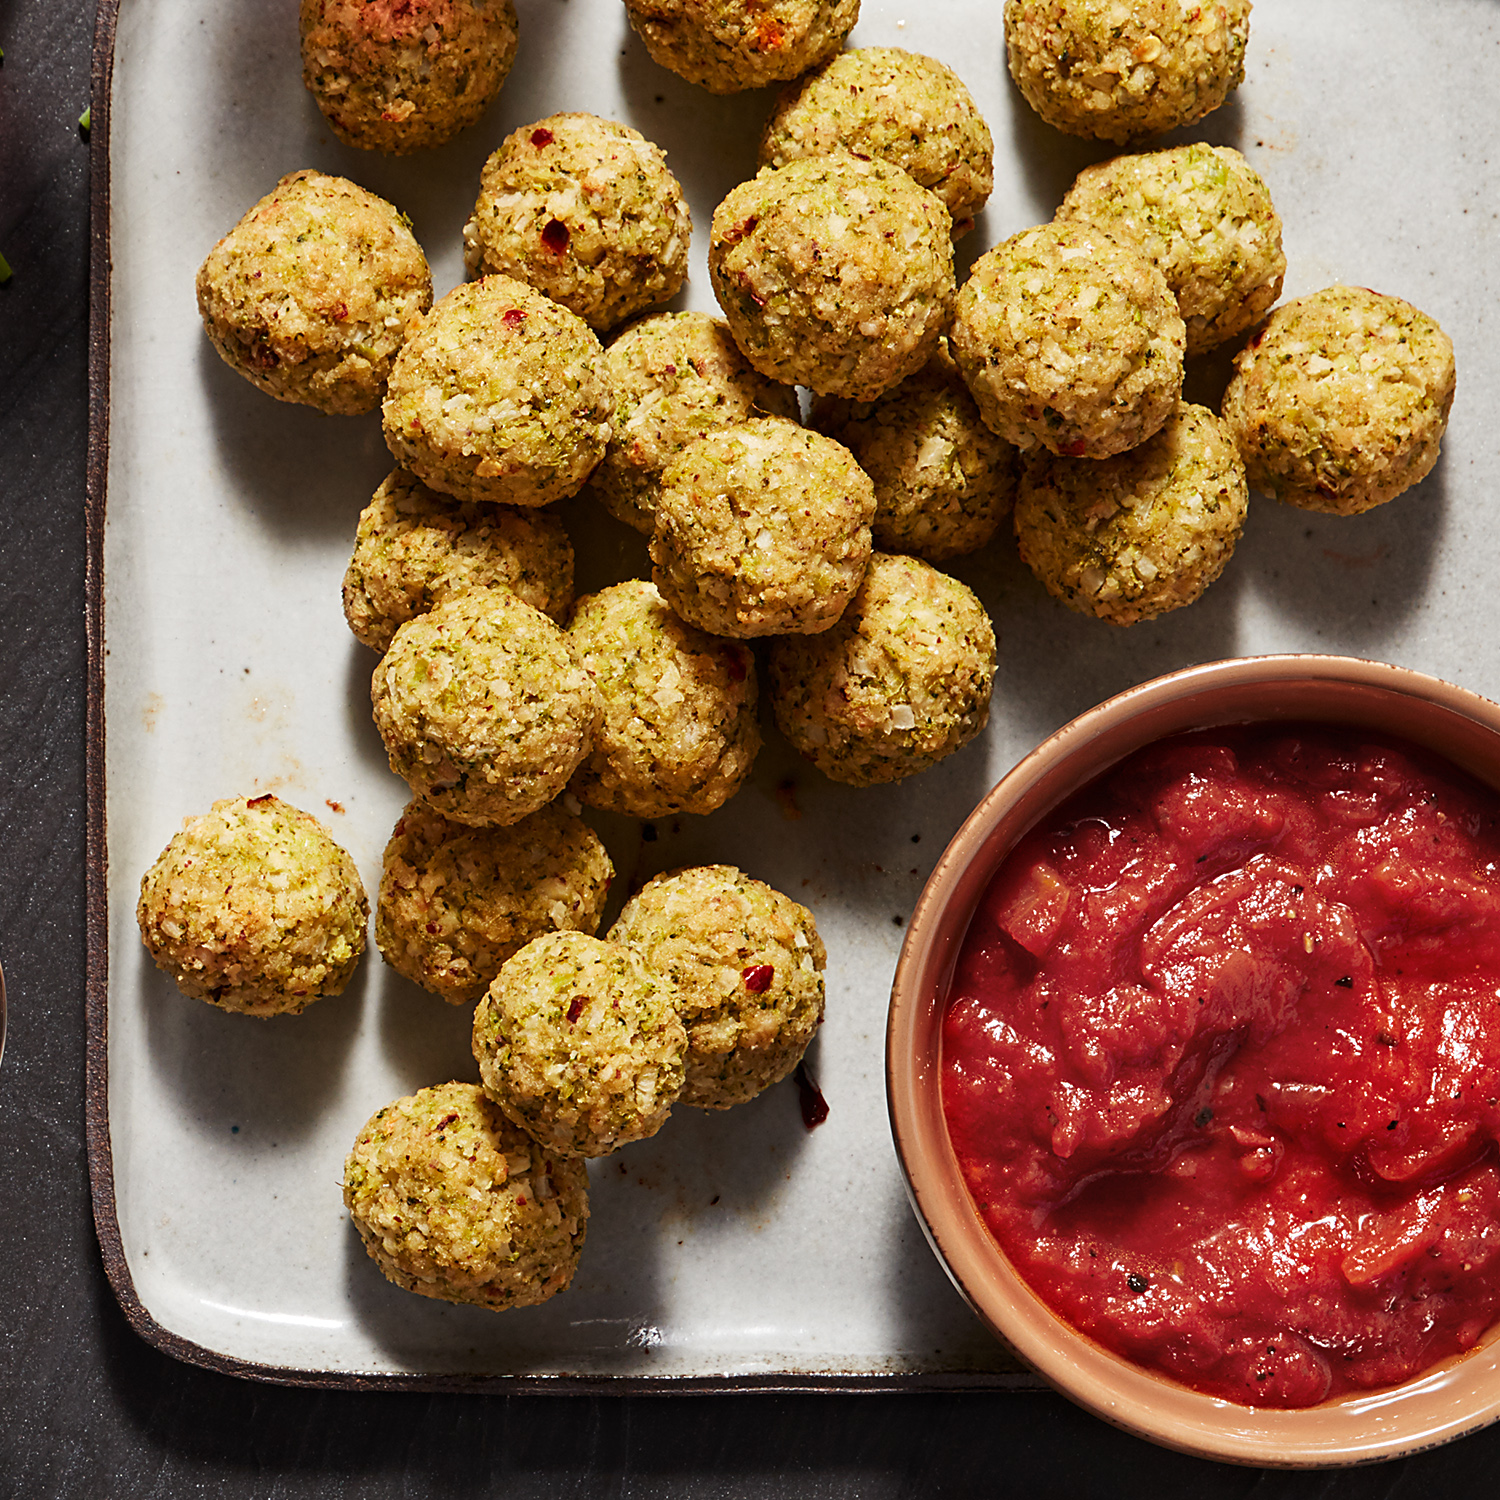 Rachael Ray's Vegetarian Meatballs with Red Sauce